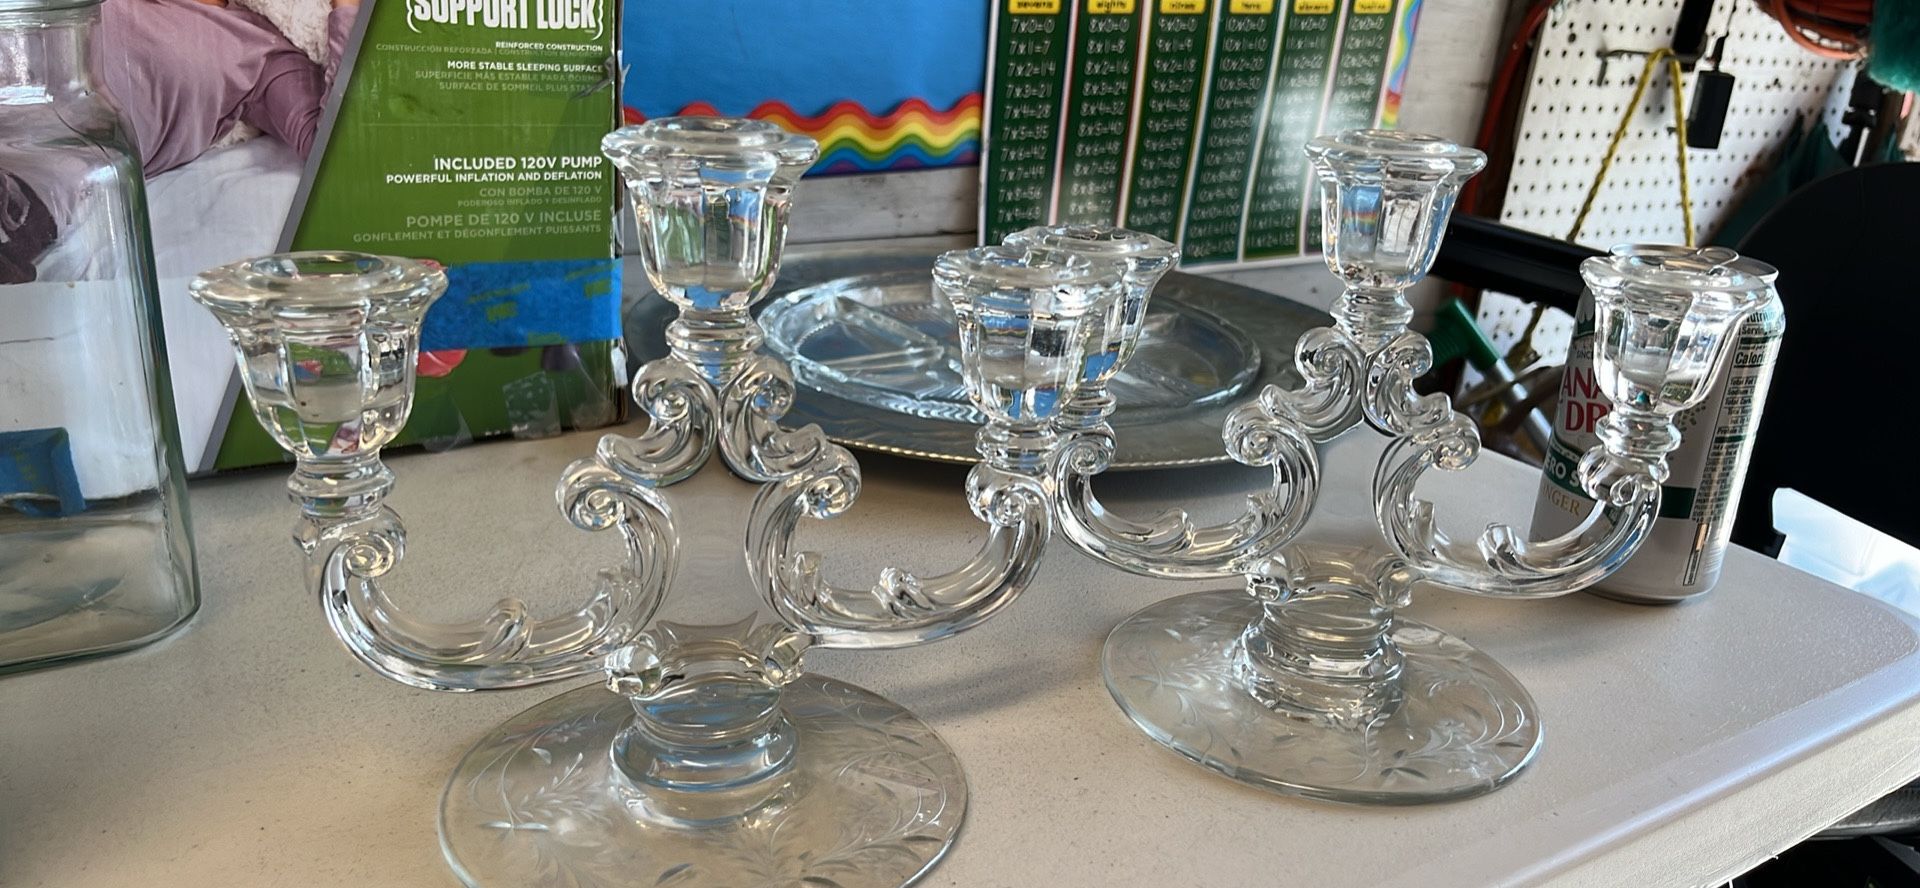 Antique Glass, Candle Stick Holders